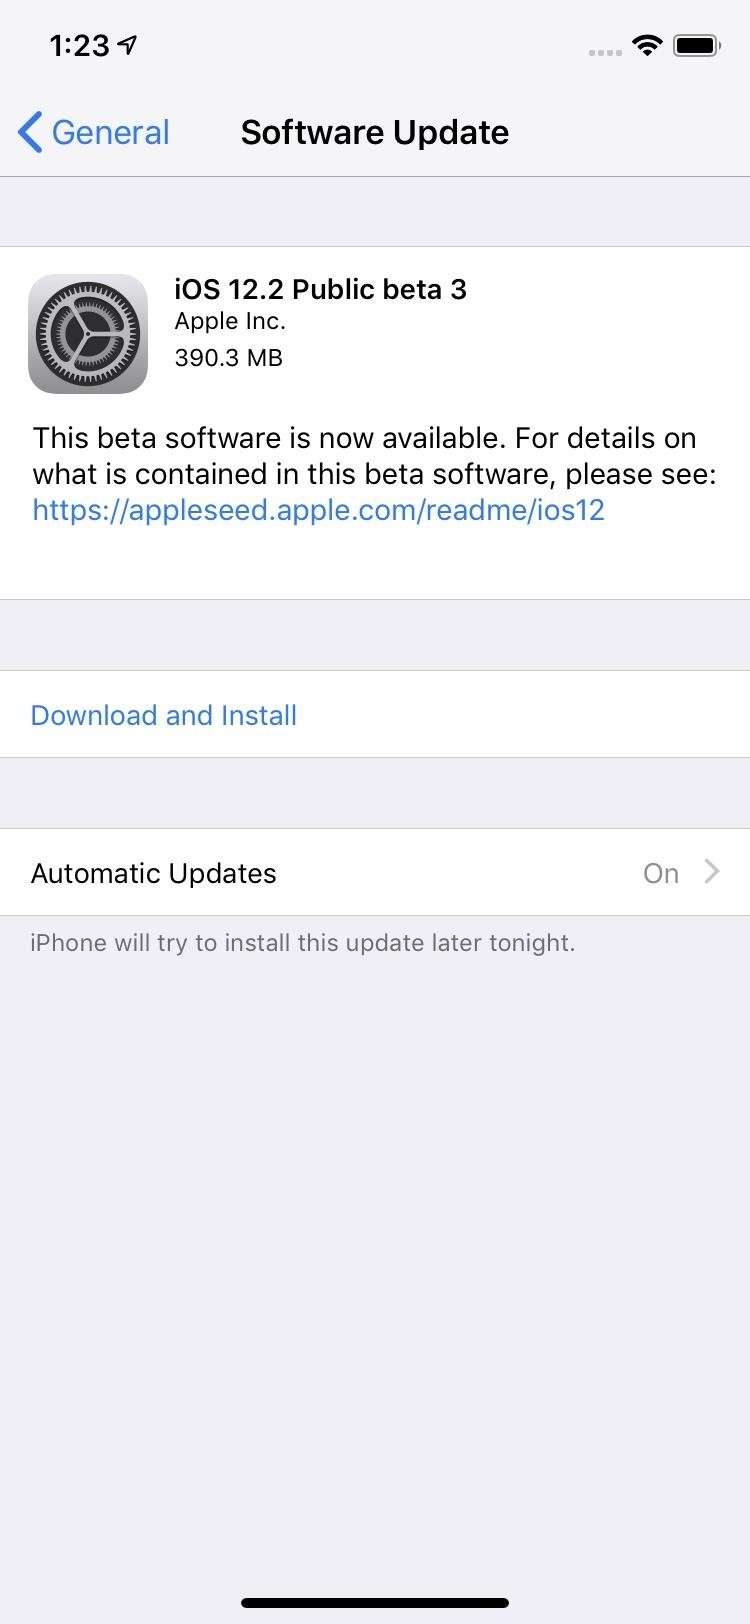 Apple Just Released iOS 12.2 Public Beta 3 for iPhone, Fixes Group FaceTime & Lock Screen Issue